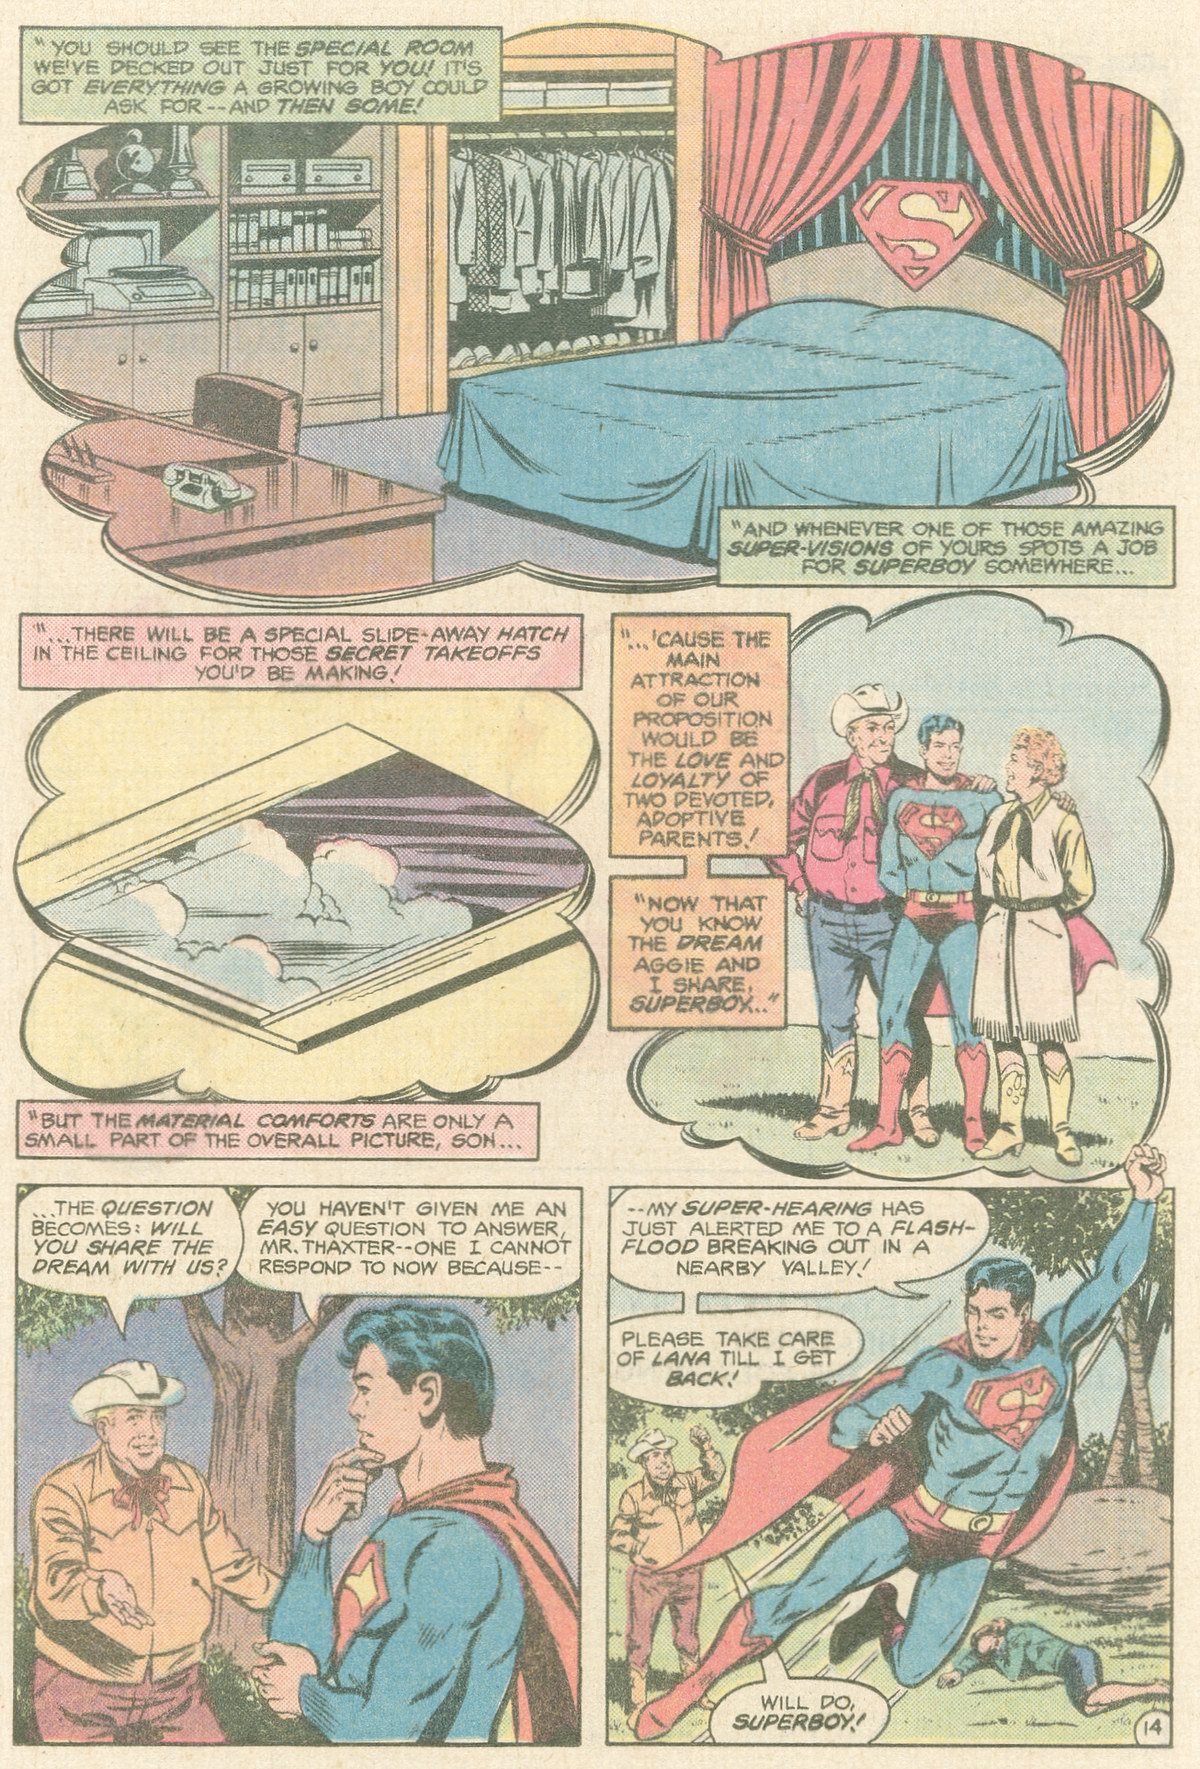 The New Adventures of Superboy 15 Page 14